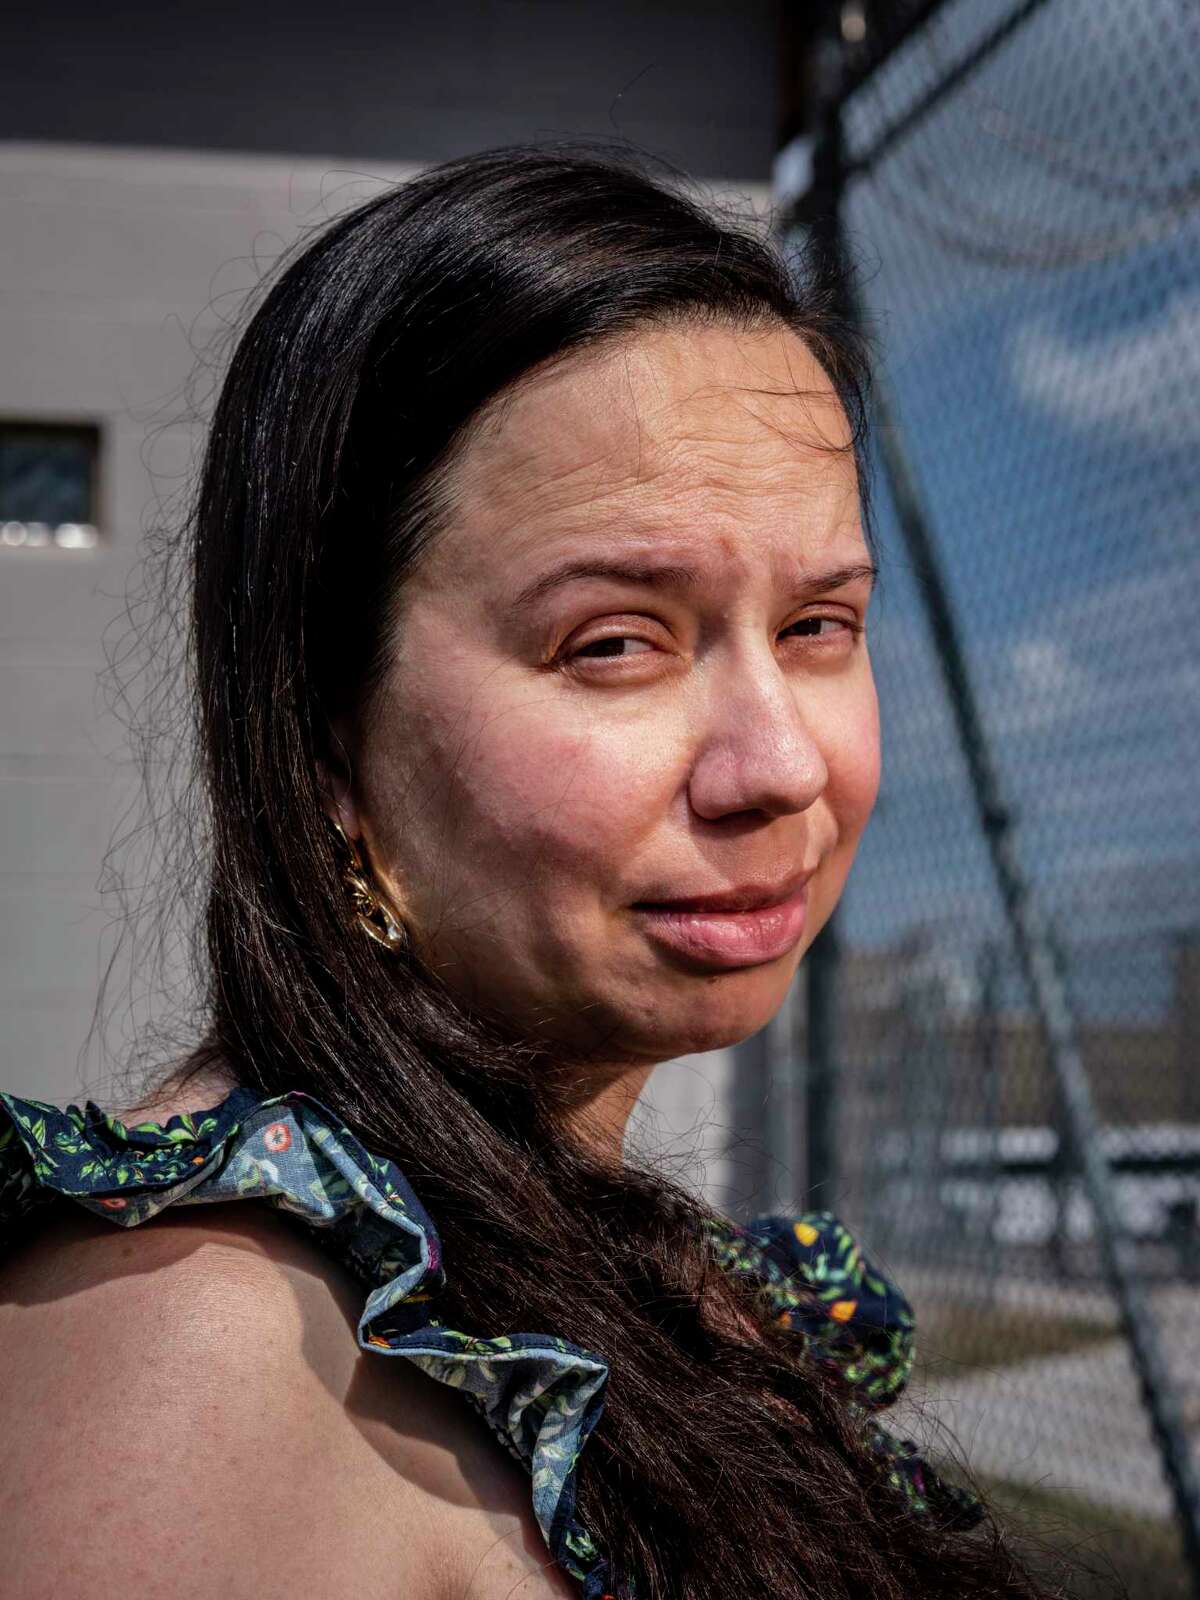 Amy Kamp, who has been advocating for inmates at the Hays County Jail who remain incarcerated for extended periods of time without having been convicted of a crime, poses for a portrait outside the jail Friday, Oct. 14, 2022, in San Marcos.